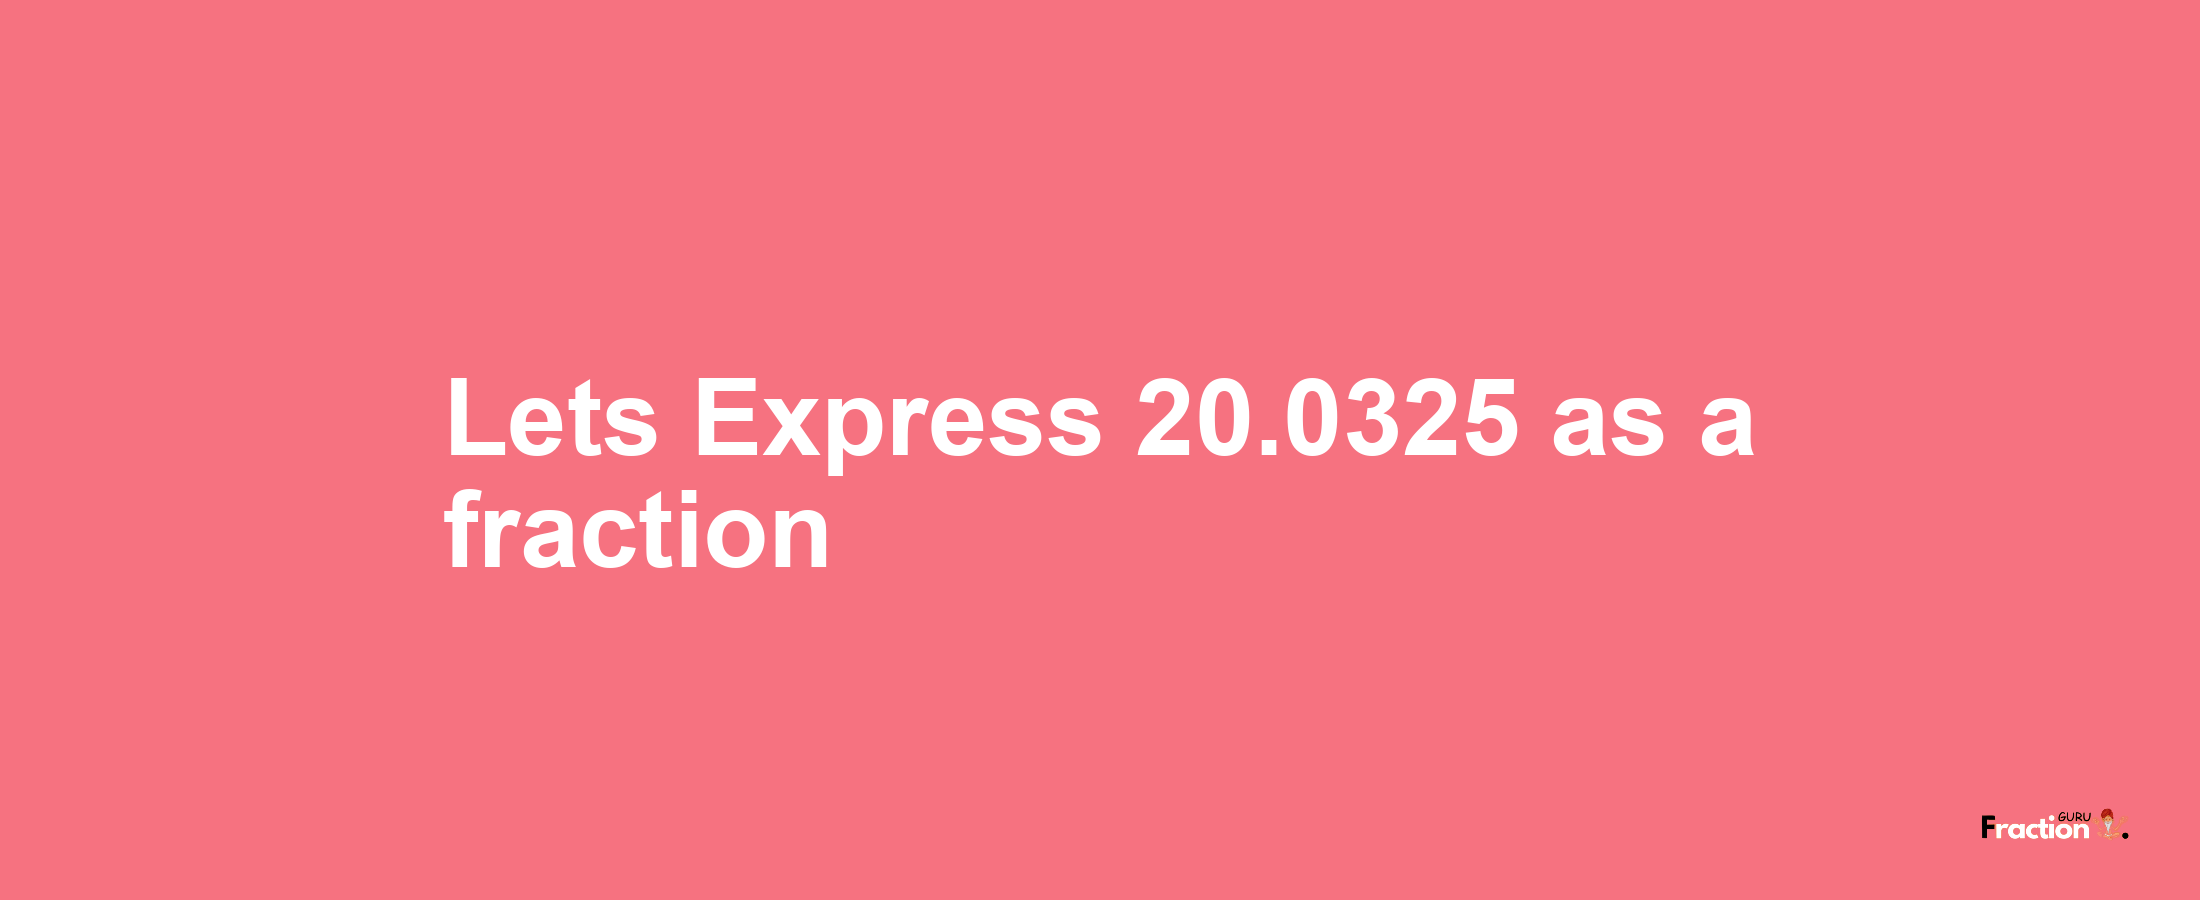 Lets Express 20.0325 as afraction